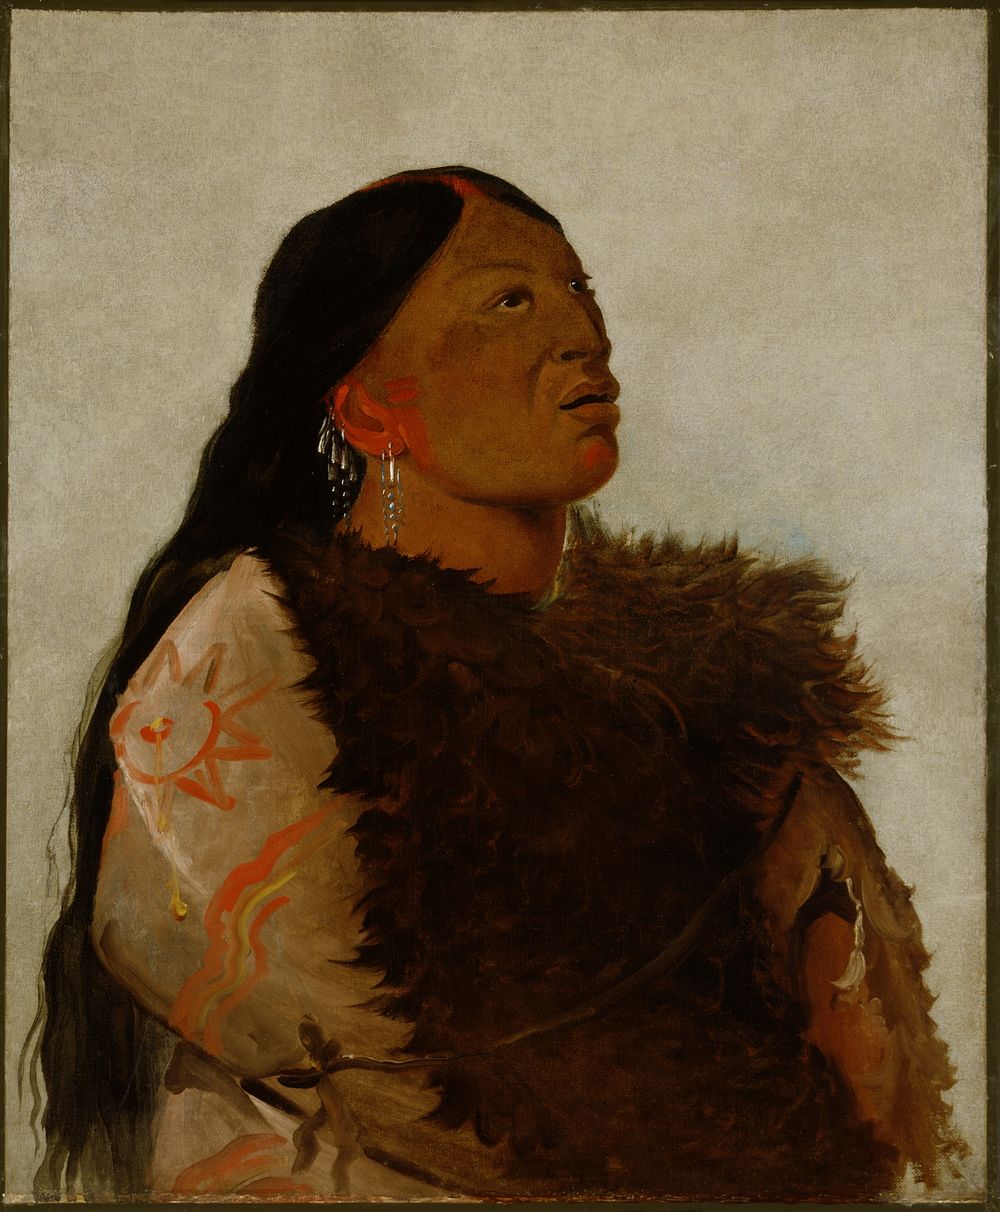 Wife of The Six (1832) painting in high resolution by George Catlin.  